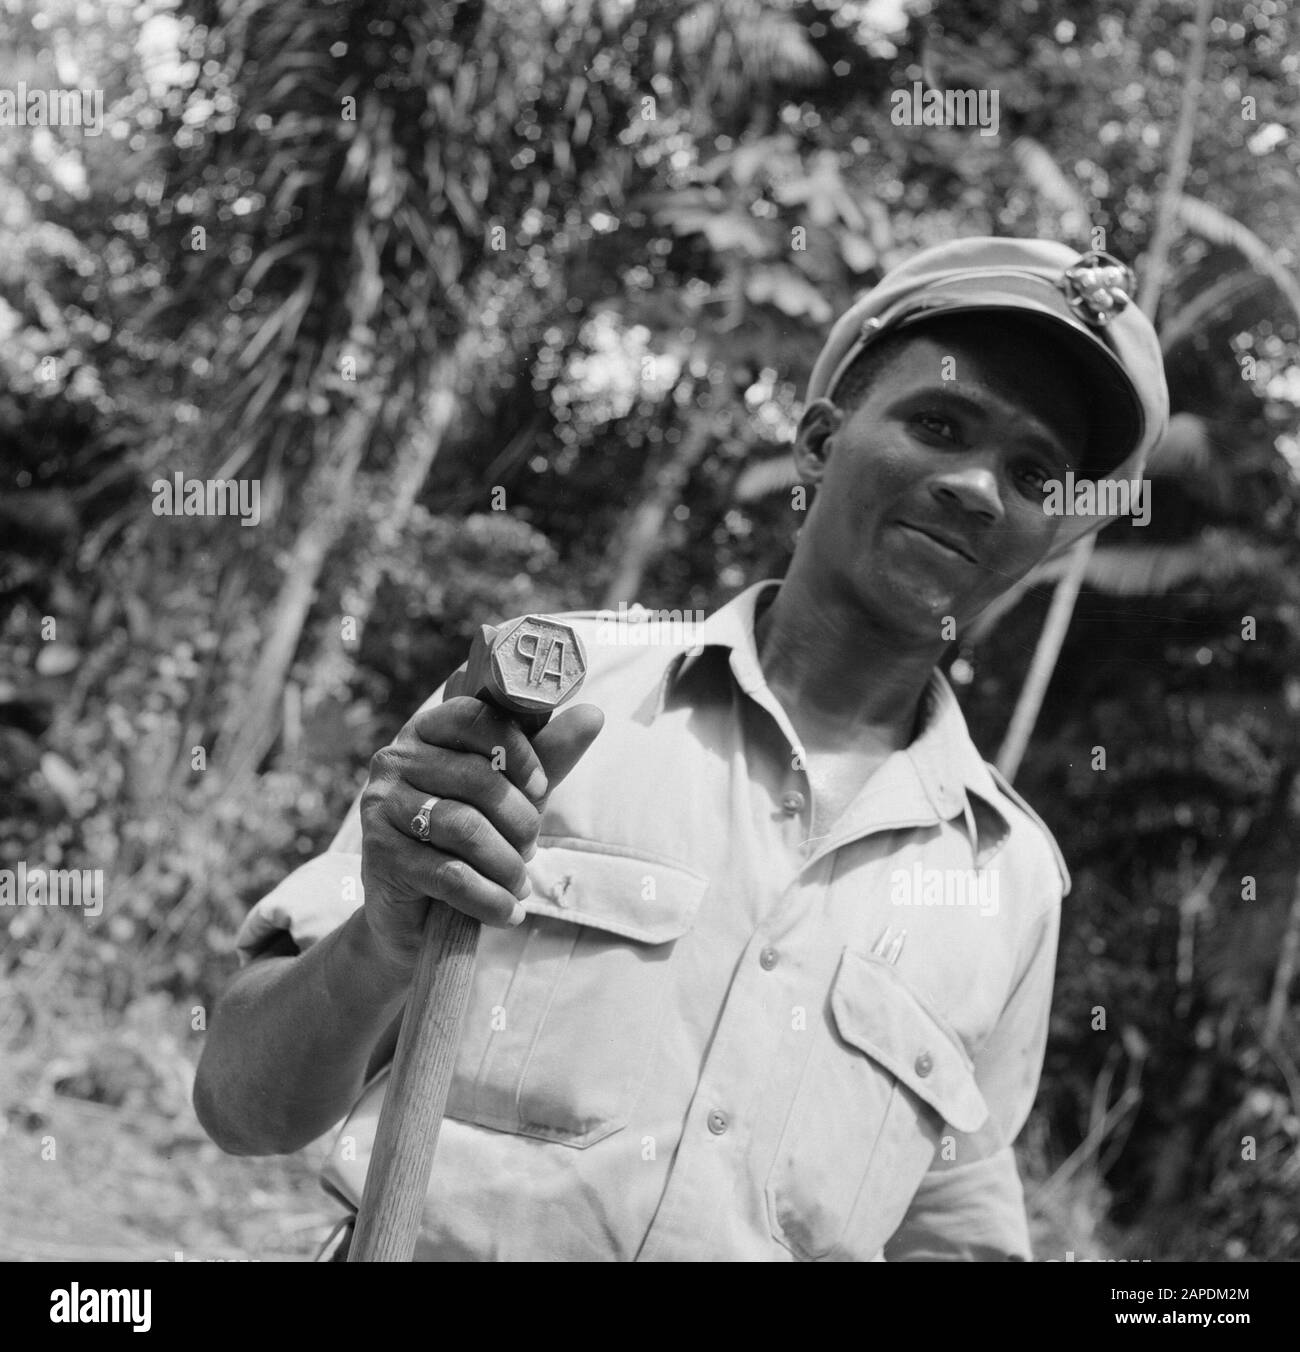 Netherlands Antilles and Suriname at the time of the royal visit of Queen Juliana and Prince Bernhard in 1955 Description: Tax Officer with stamp Date: 1 October 1955 Location: Suriname Keywords: officials, taxes, wood, industry, stamps Stock Photo